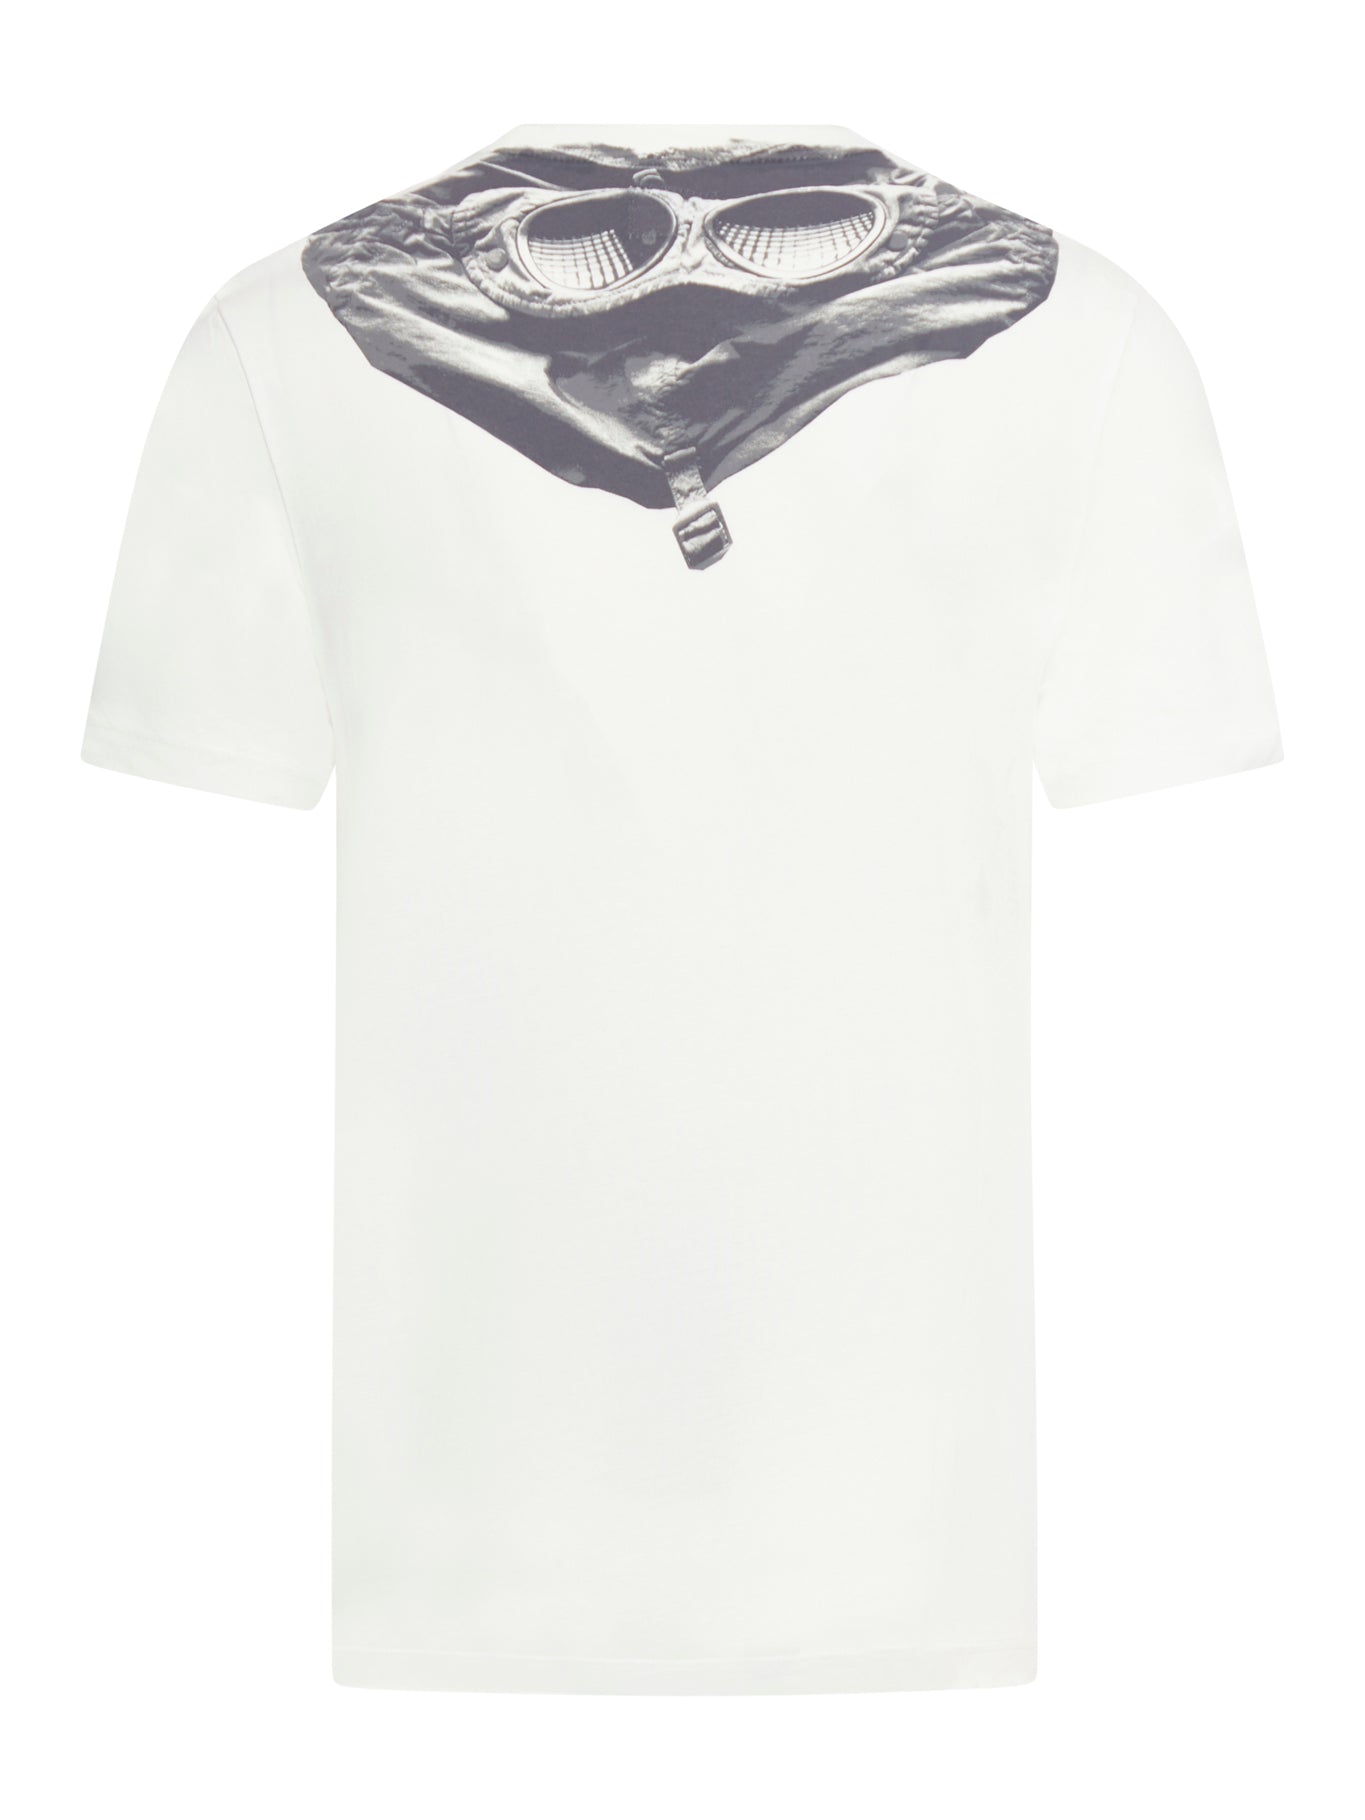 30/1 T-shirt with Goggles print